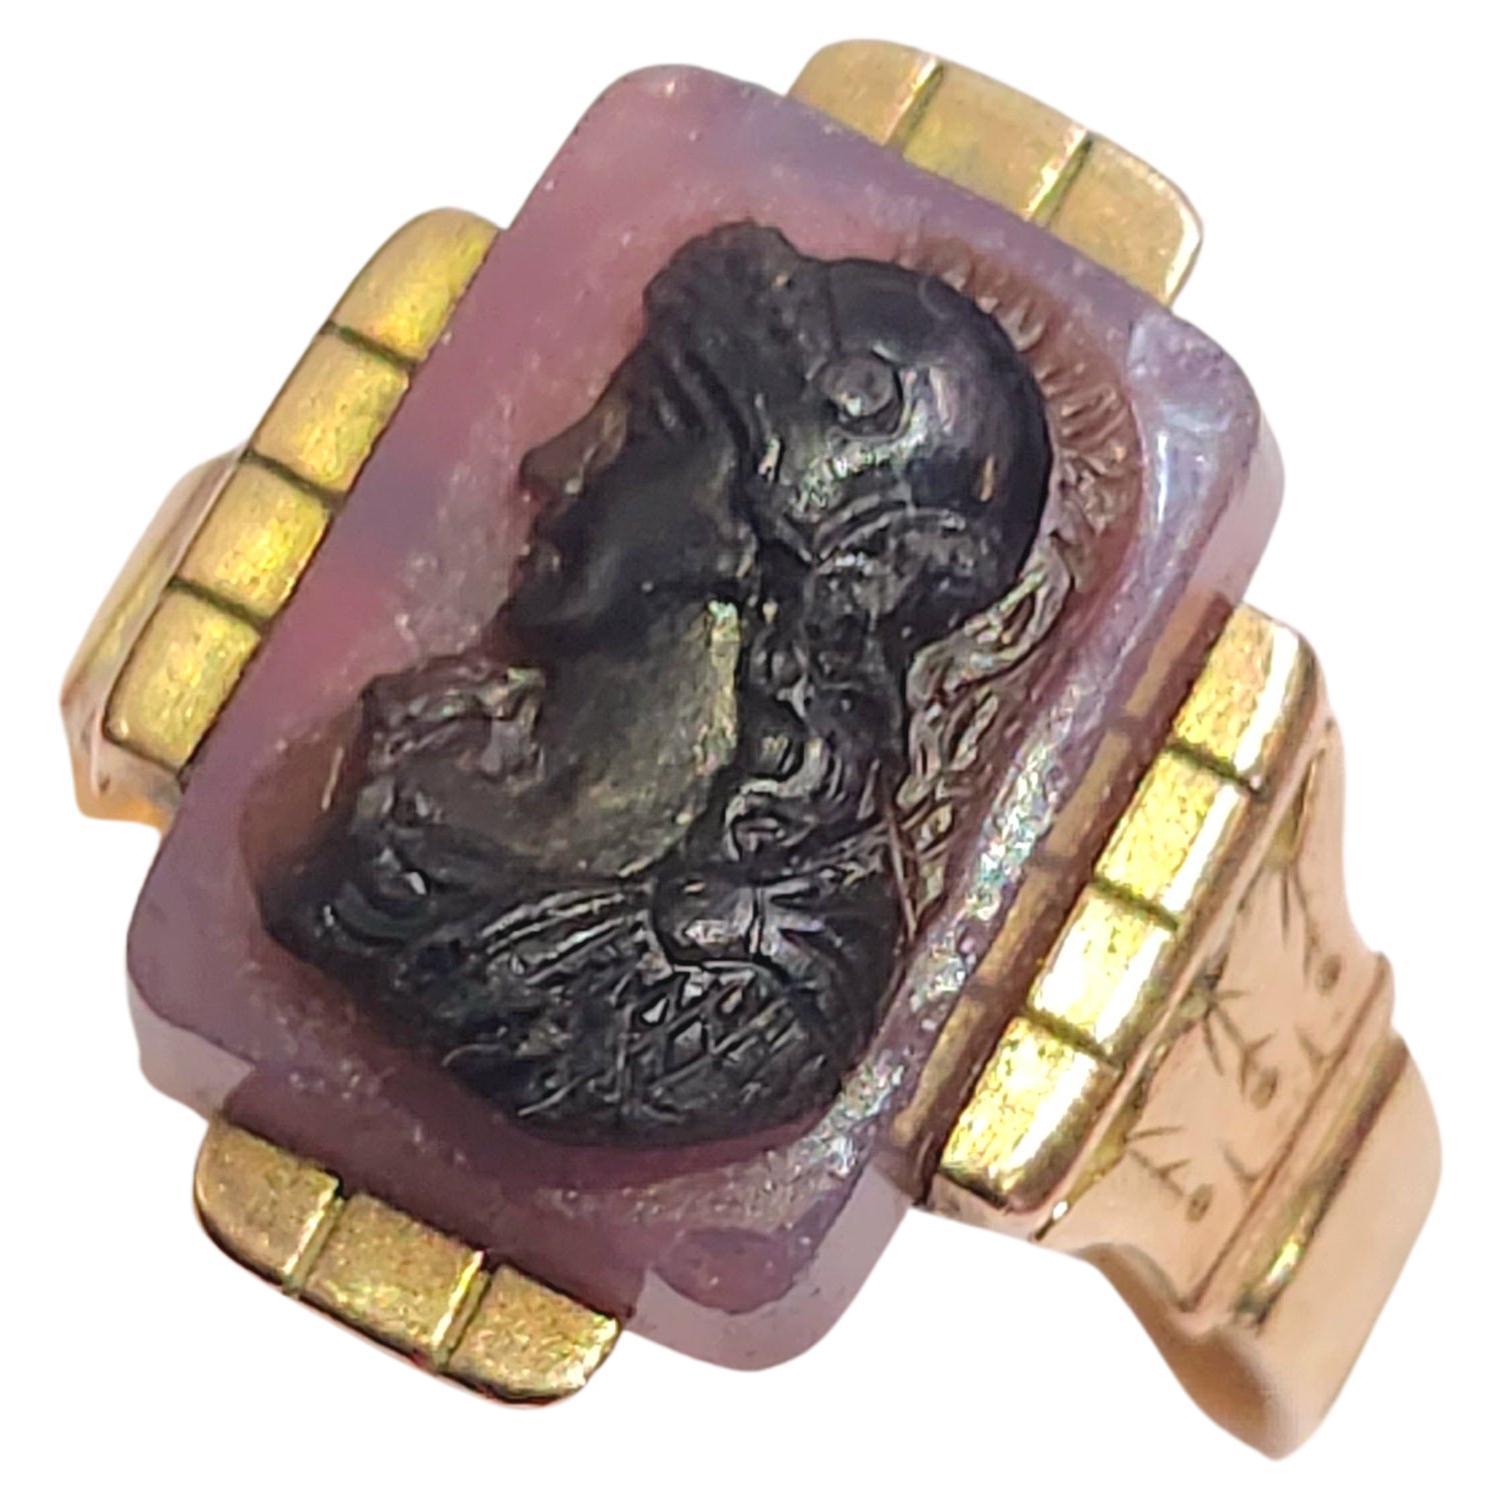 Antique 1850s carnelian and onyx cameo ring of a womans profile in 14k gold ring setting with detailed work on sides